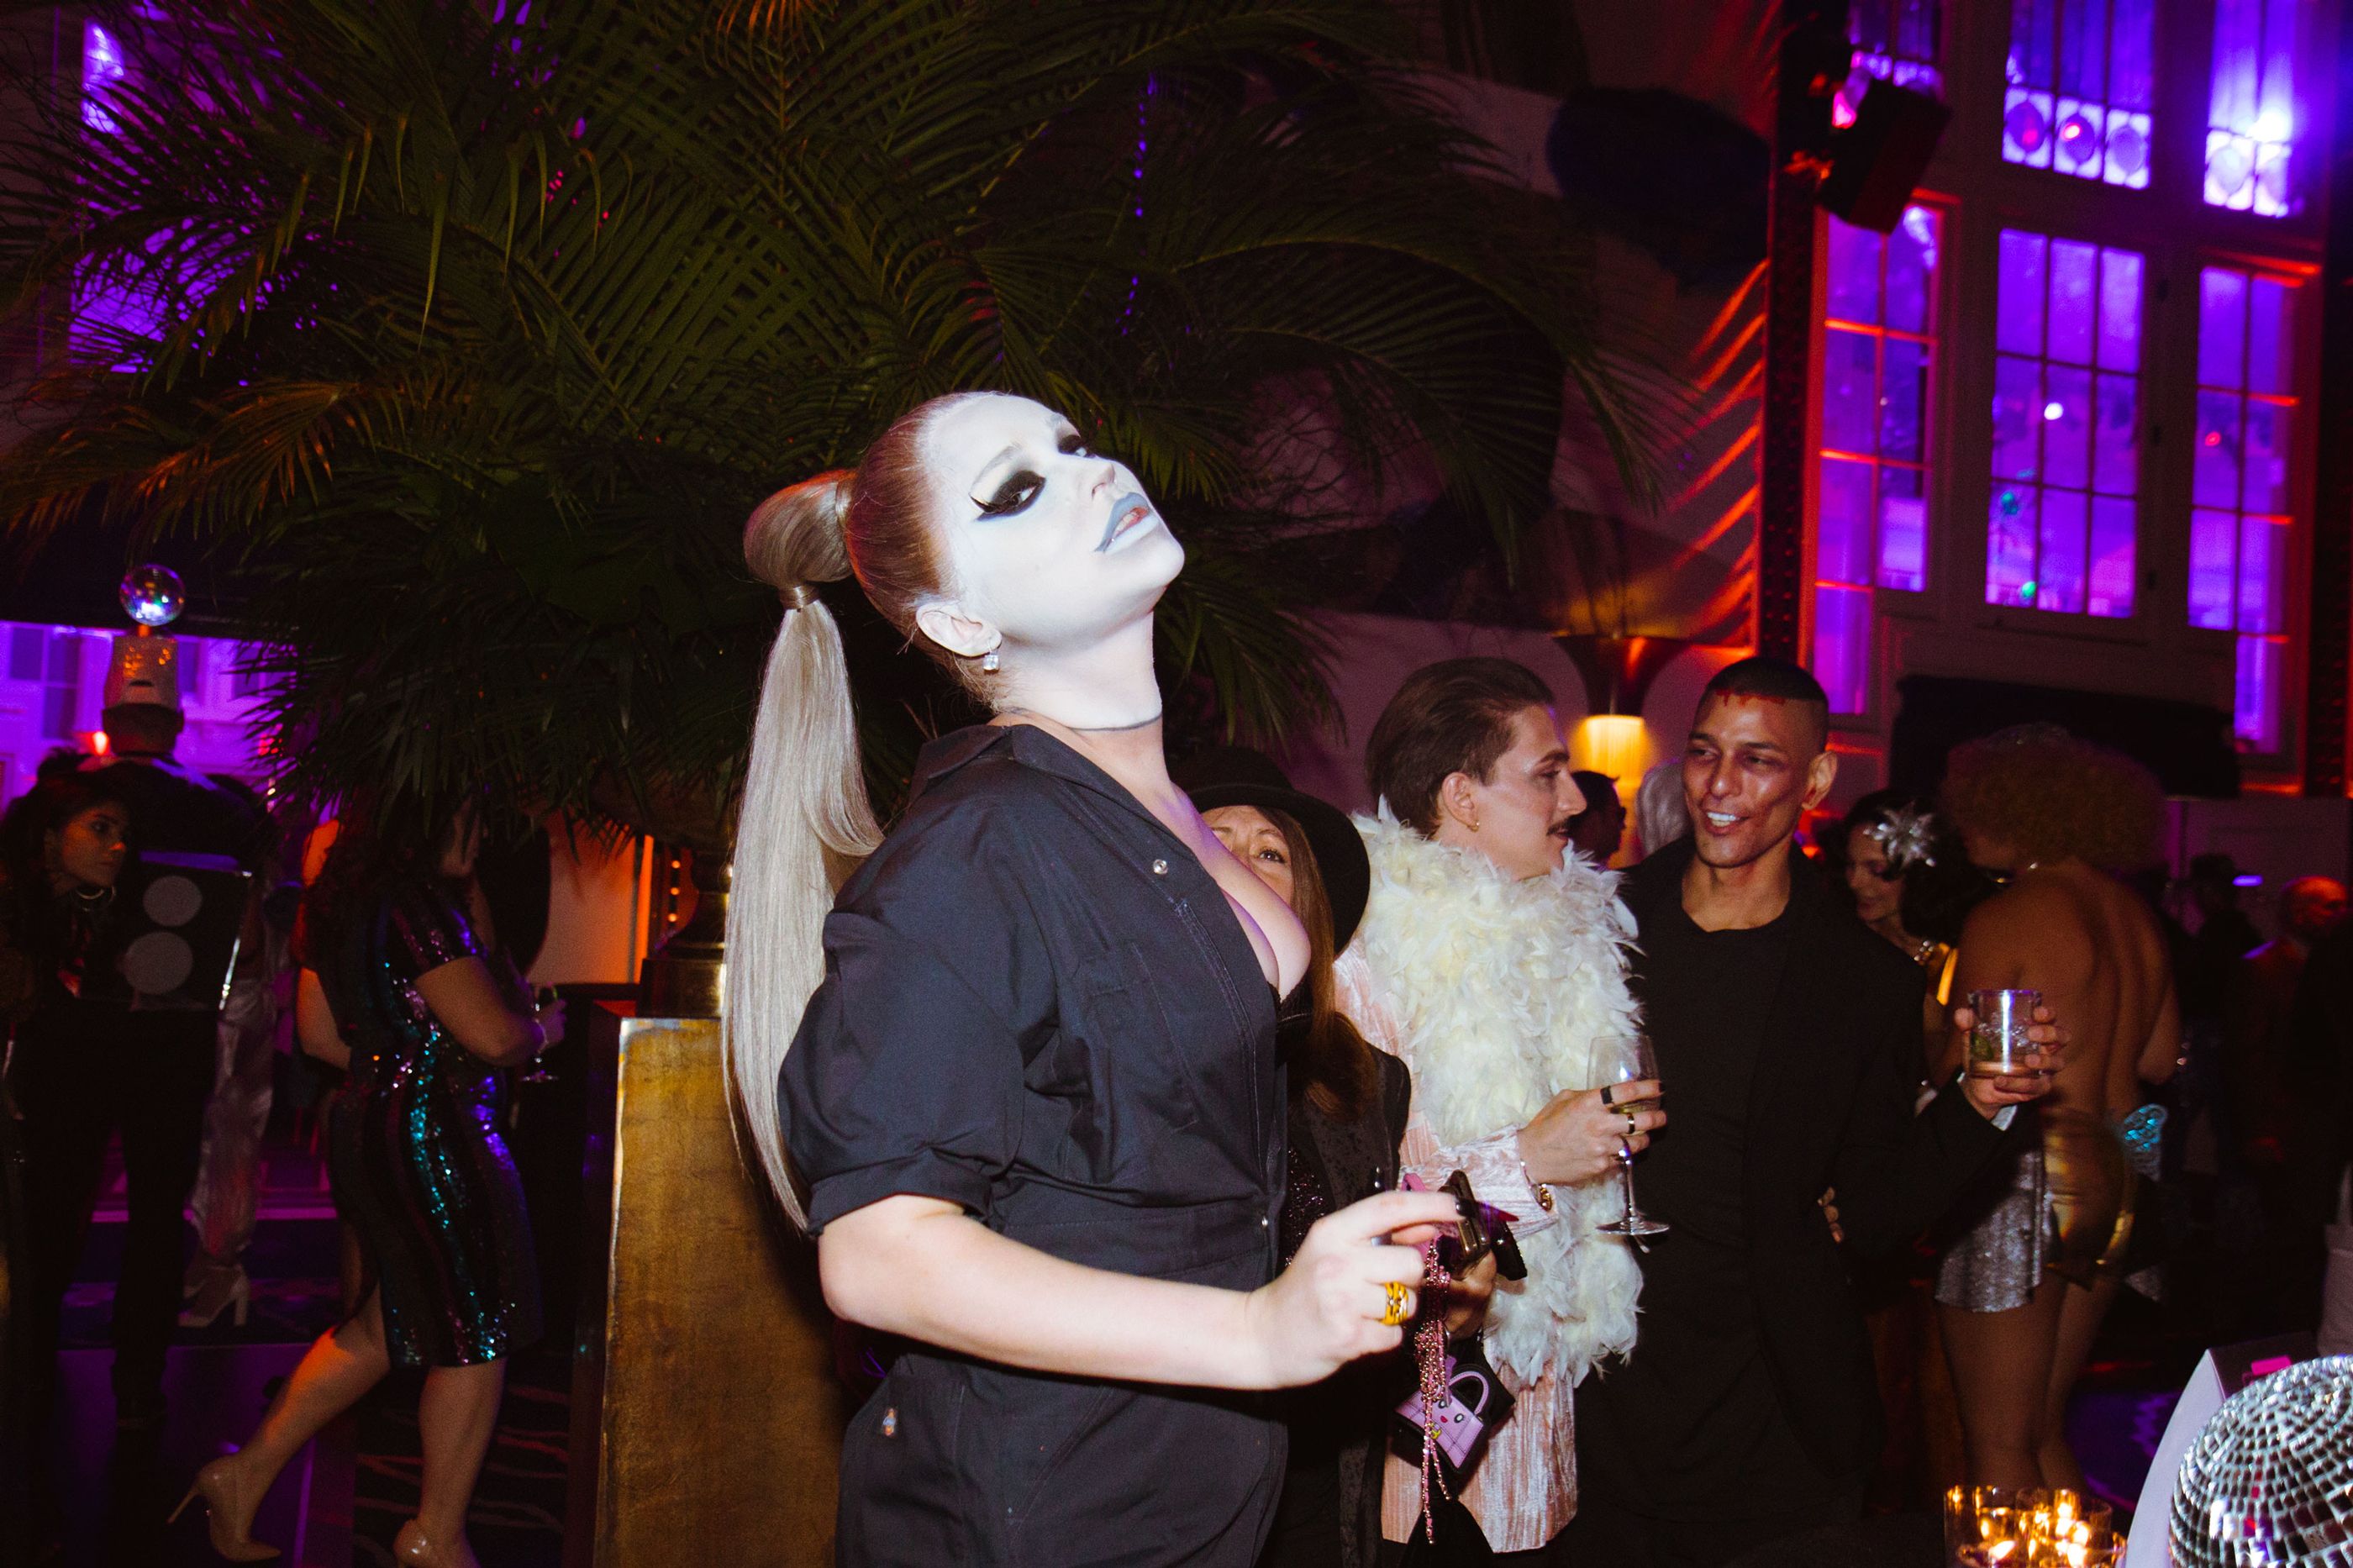 Kim Kardashian Ass Fucked - Partying With Kim Petras at Bette Midler's Halloween Gala